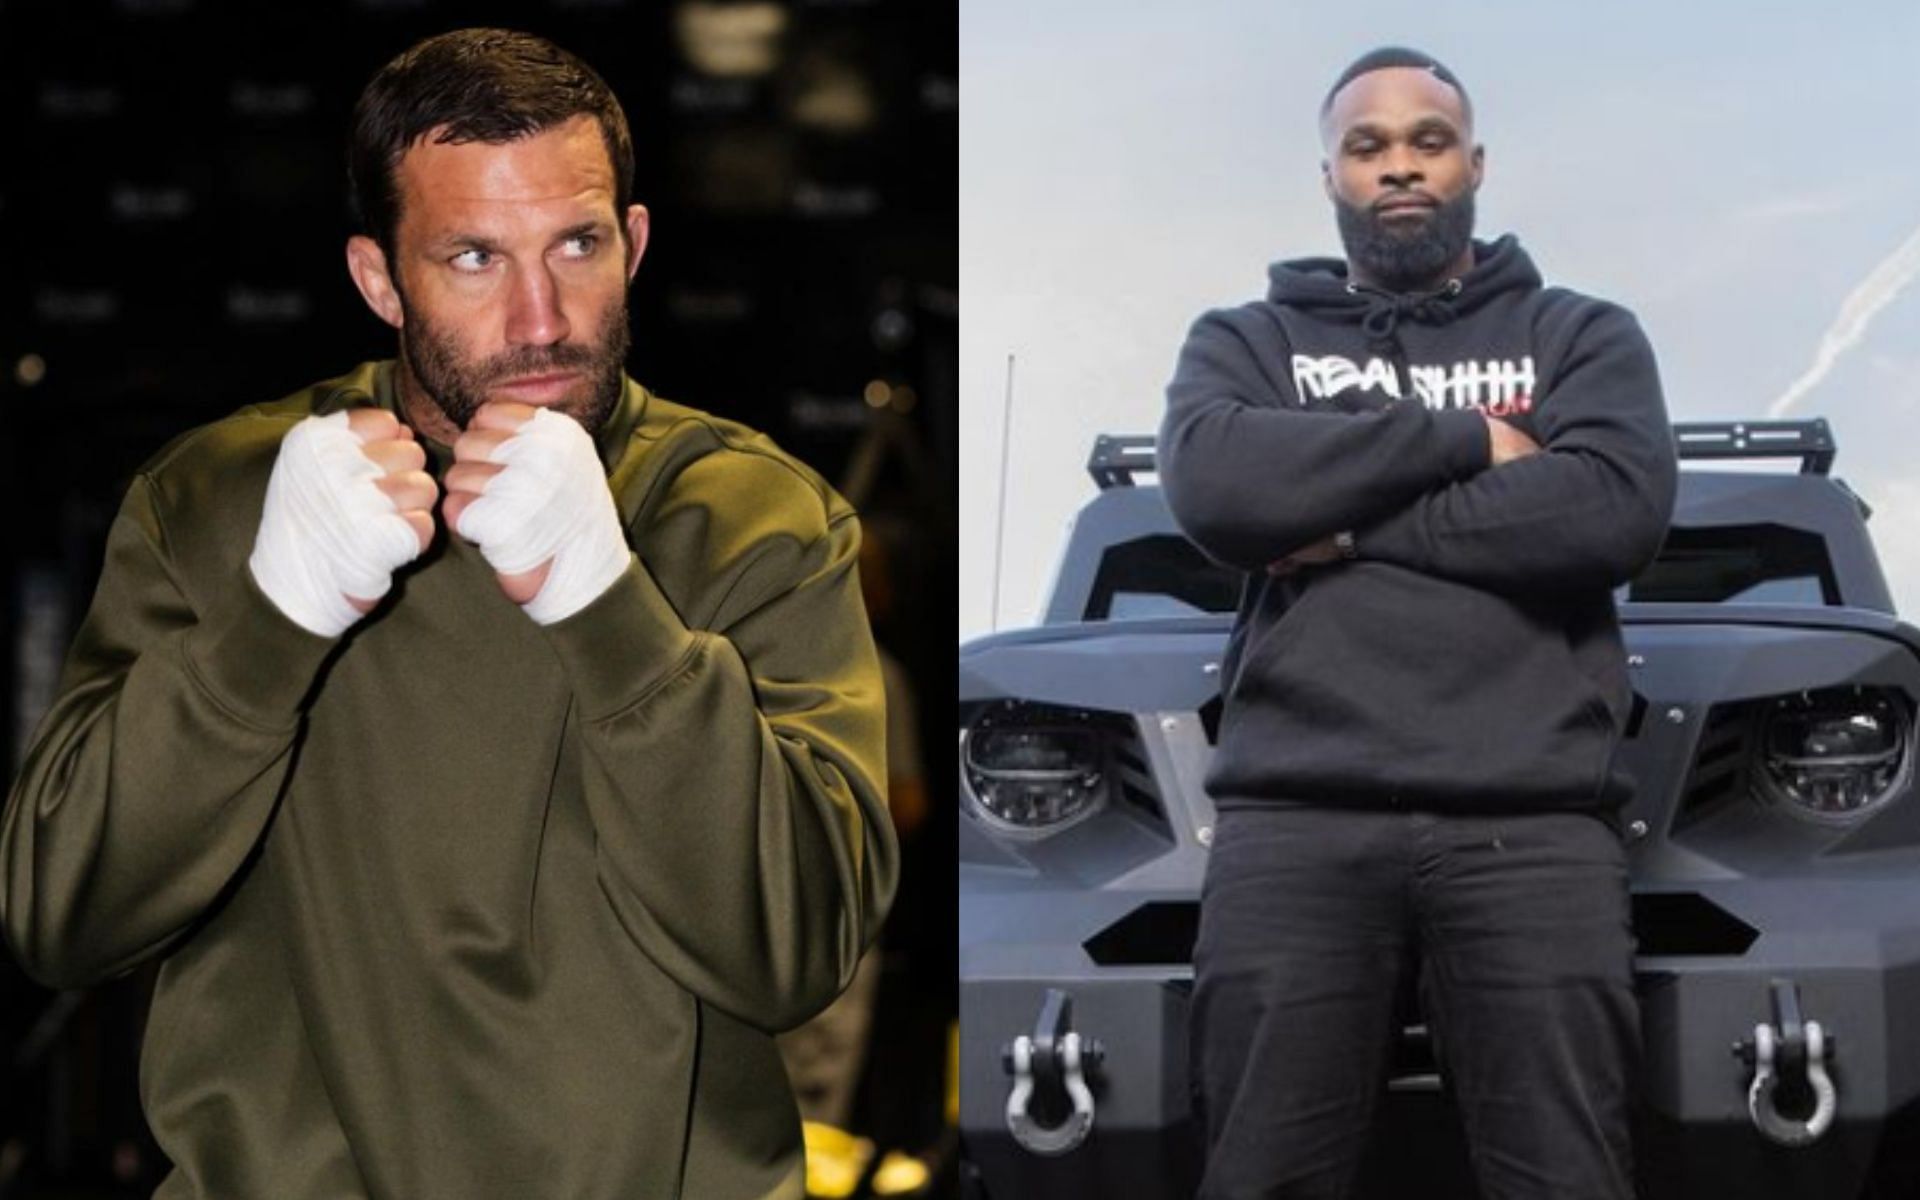 Luke Rockhold (L) and Tyron Woodley (R) will reportedly be coaches in Russia. [Images via @therealest and @LukeRockhod on Instagram]